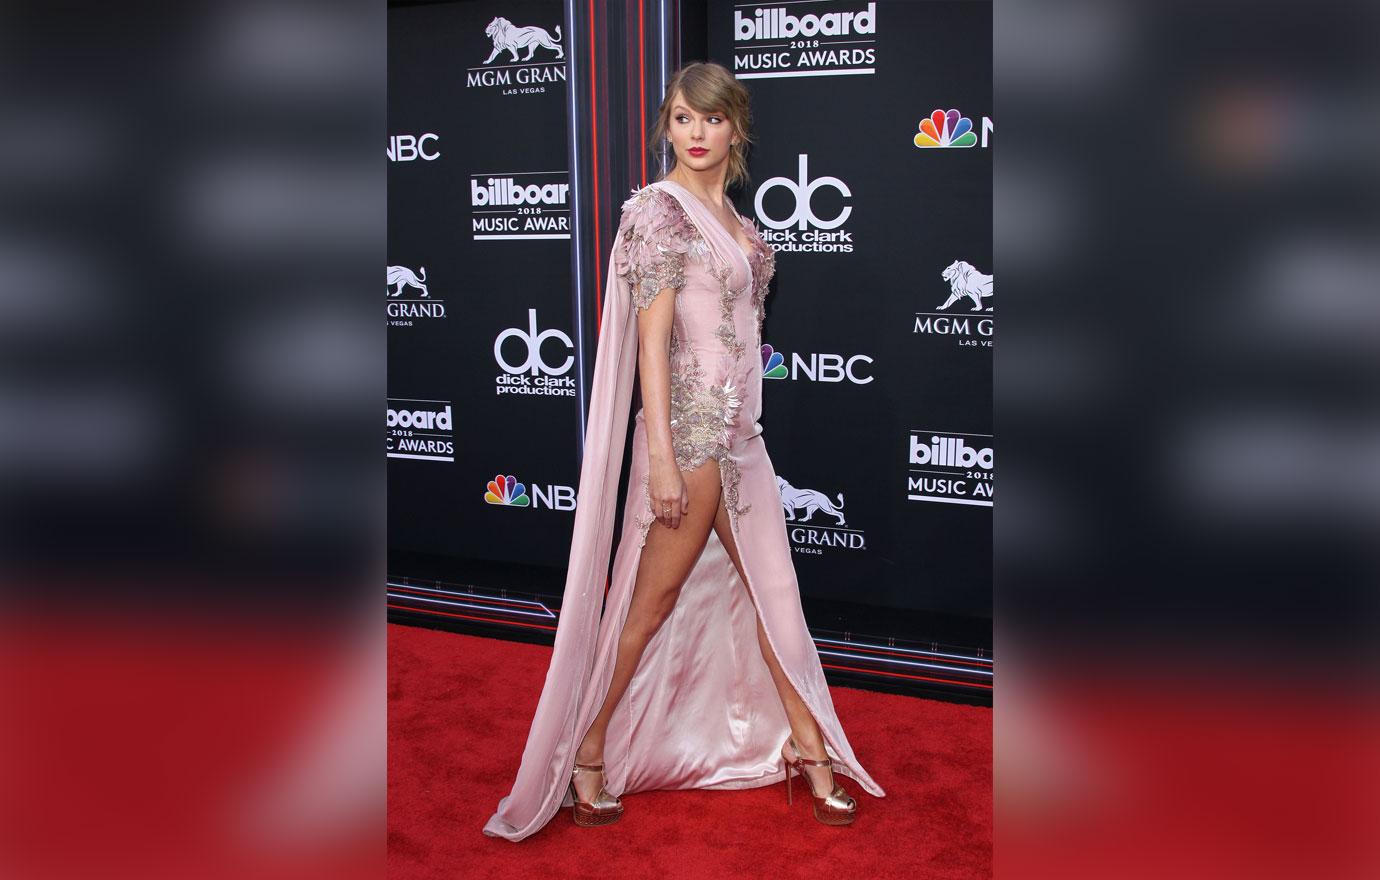 Taylor Swift Blocks Darren Criss’ View Of Shawn Mendes At The Bbmas